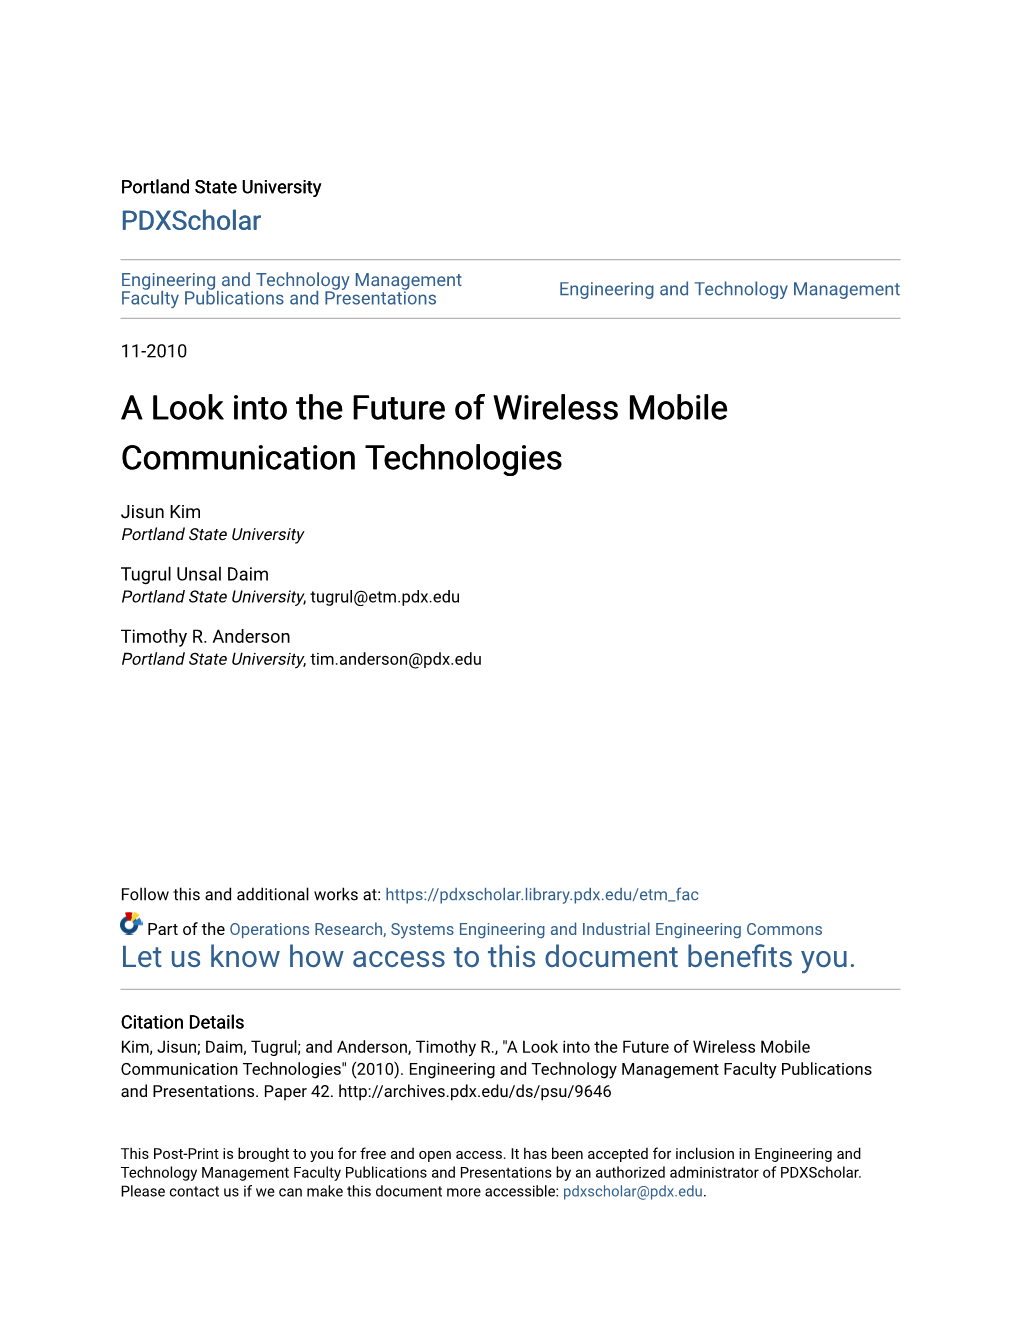 A Look Into the Future of Wireless Mobile Communication Technologies